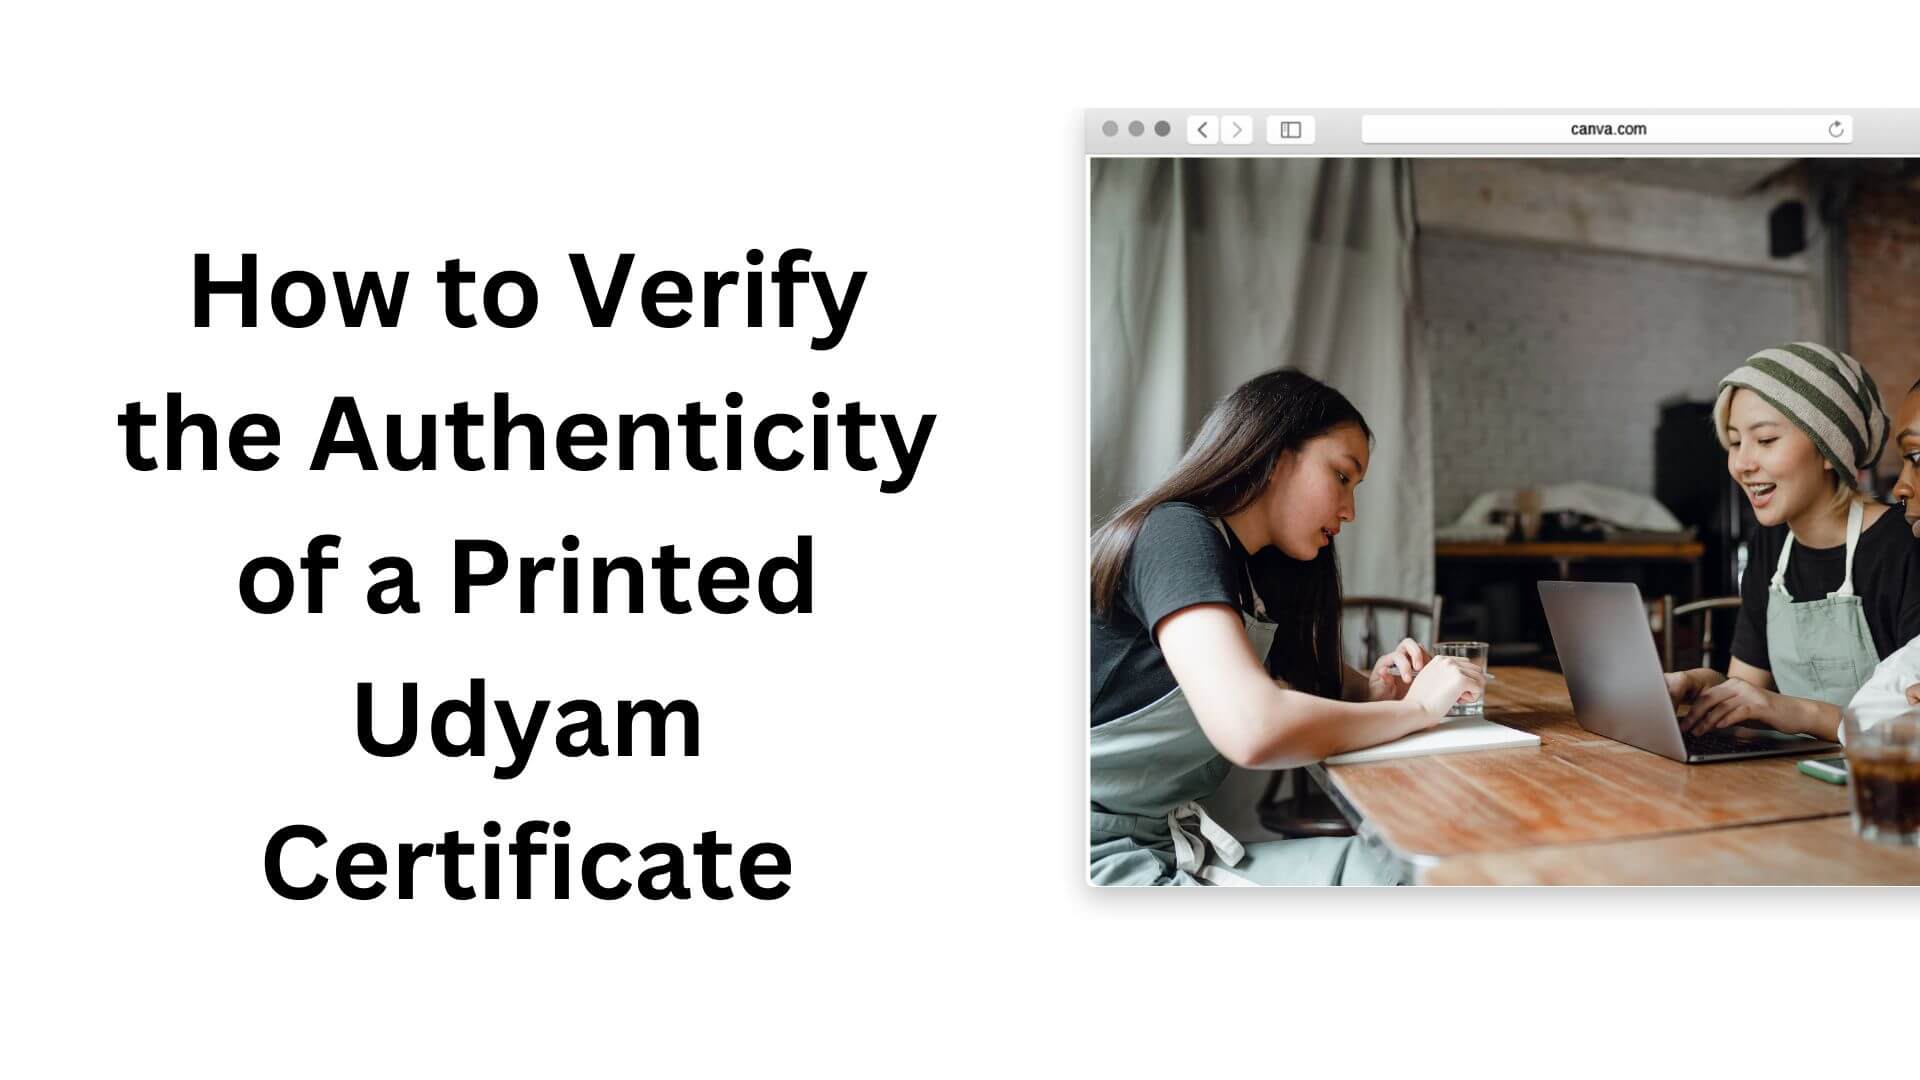 How to Verify the Authenticity of a Printed Udyam Certificate